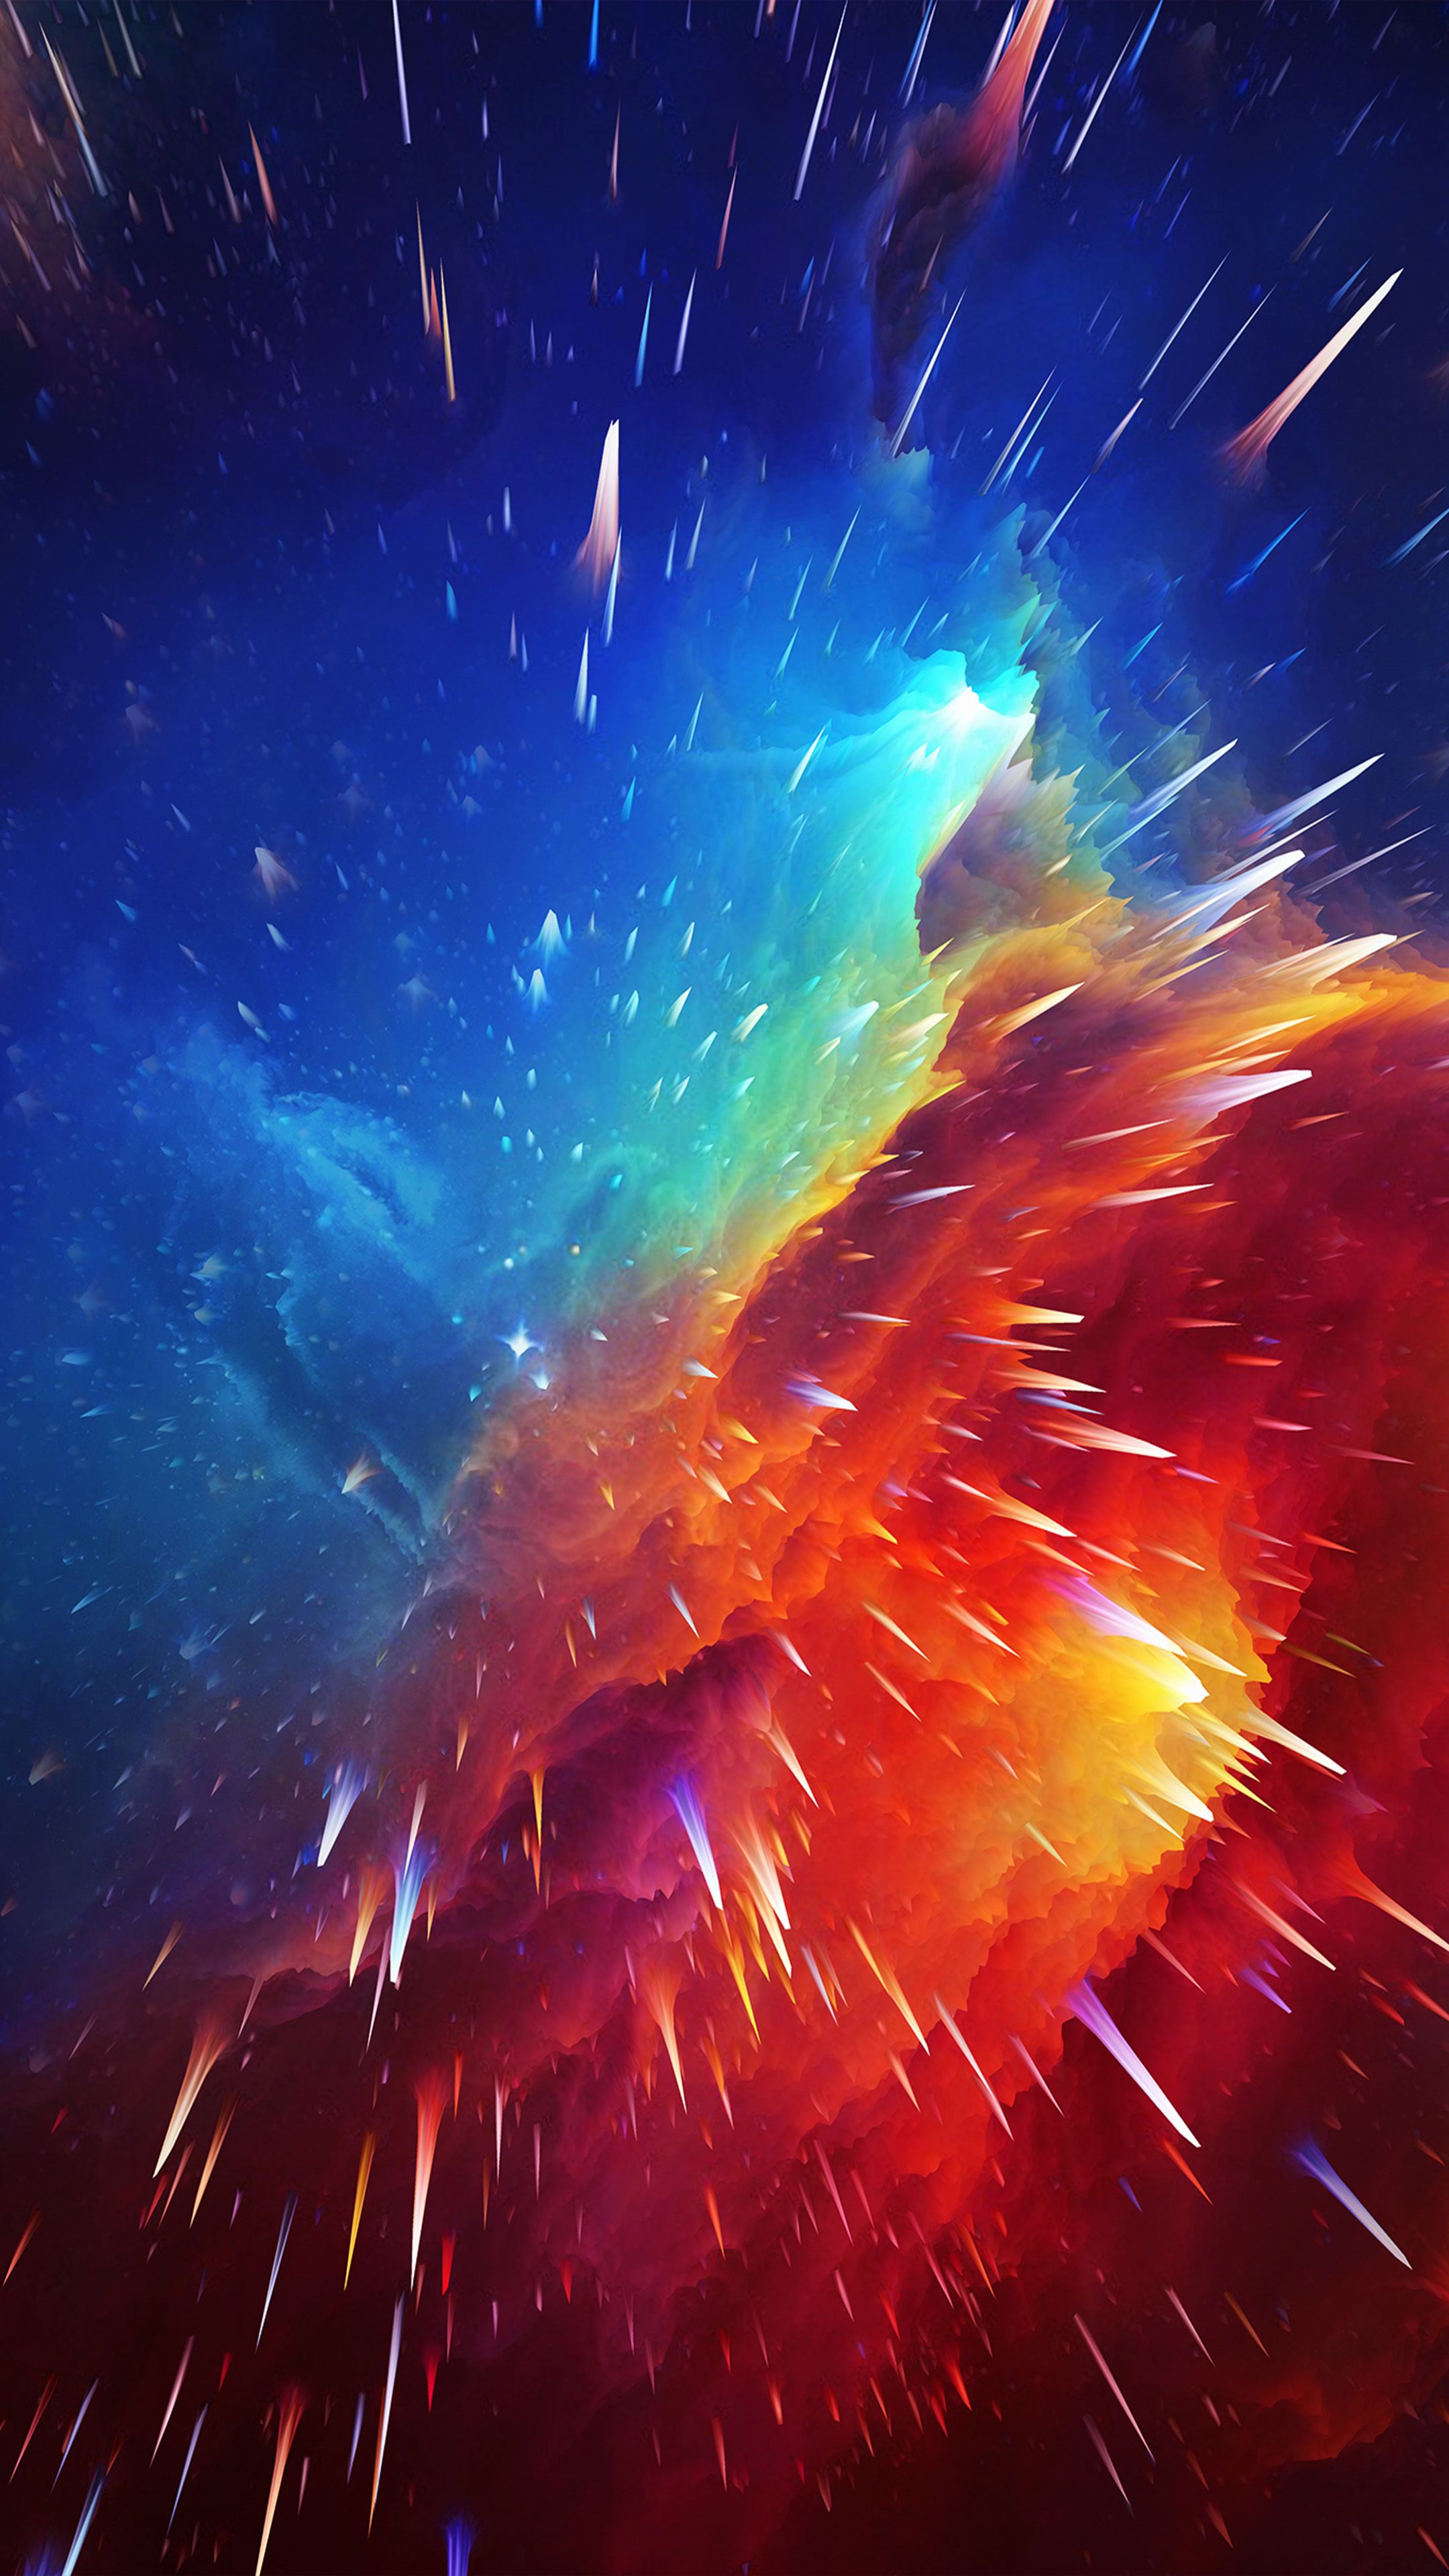 4K 4K 4K / 20 Cool 4k Wallpapers The Nology 4k resolution refers to